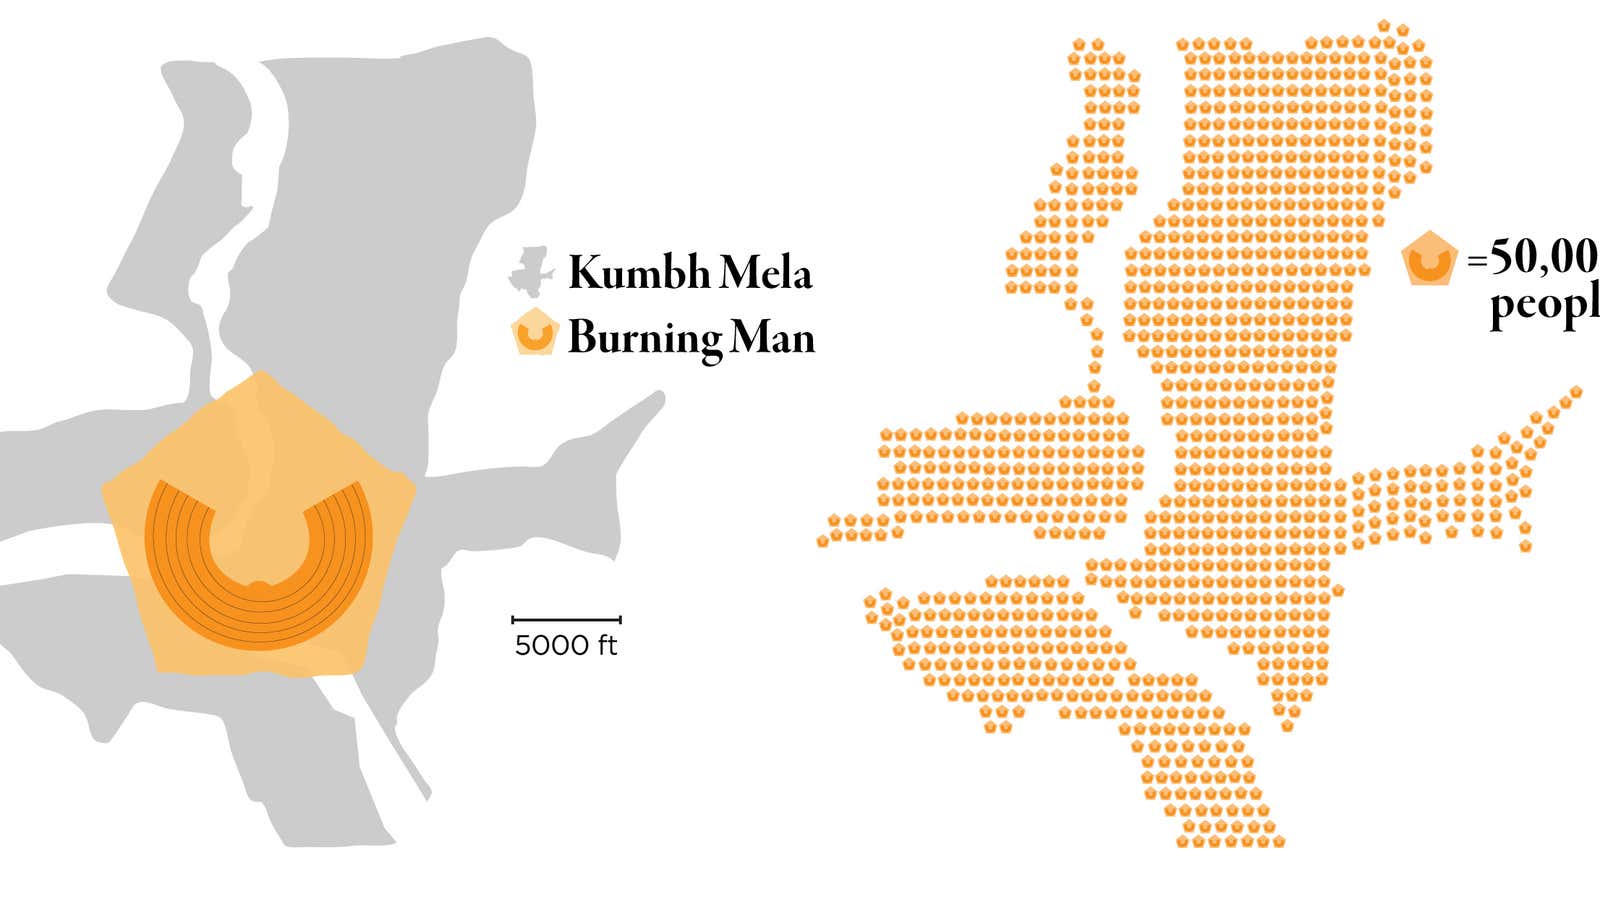 By total area, it would take approximately four Burning Man festivals to fit inside the Kumbh Mela grounds in Allahabad, India. By population, it would take more than 1,000 Burning Mans to equal the 2013 attendance at the Kumbh Mela. That’s using a conservative estimate of 50 million pilgrims over the course of the Kumbh; some estimates put the number as high as 100 million.